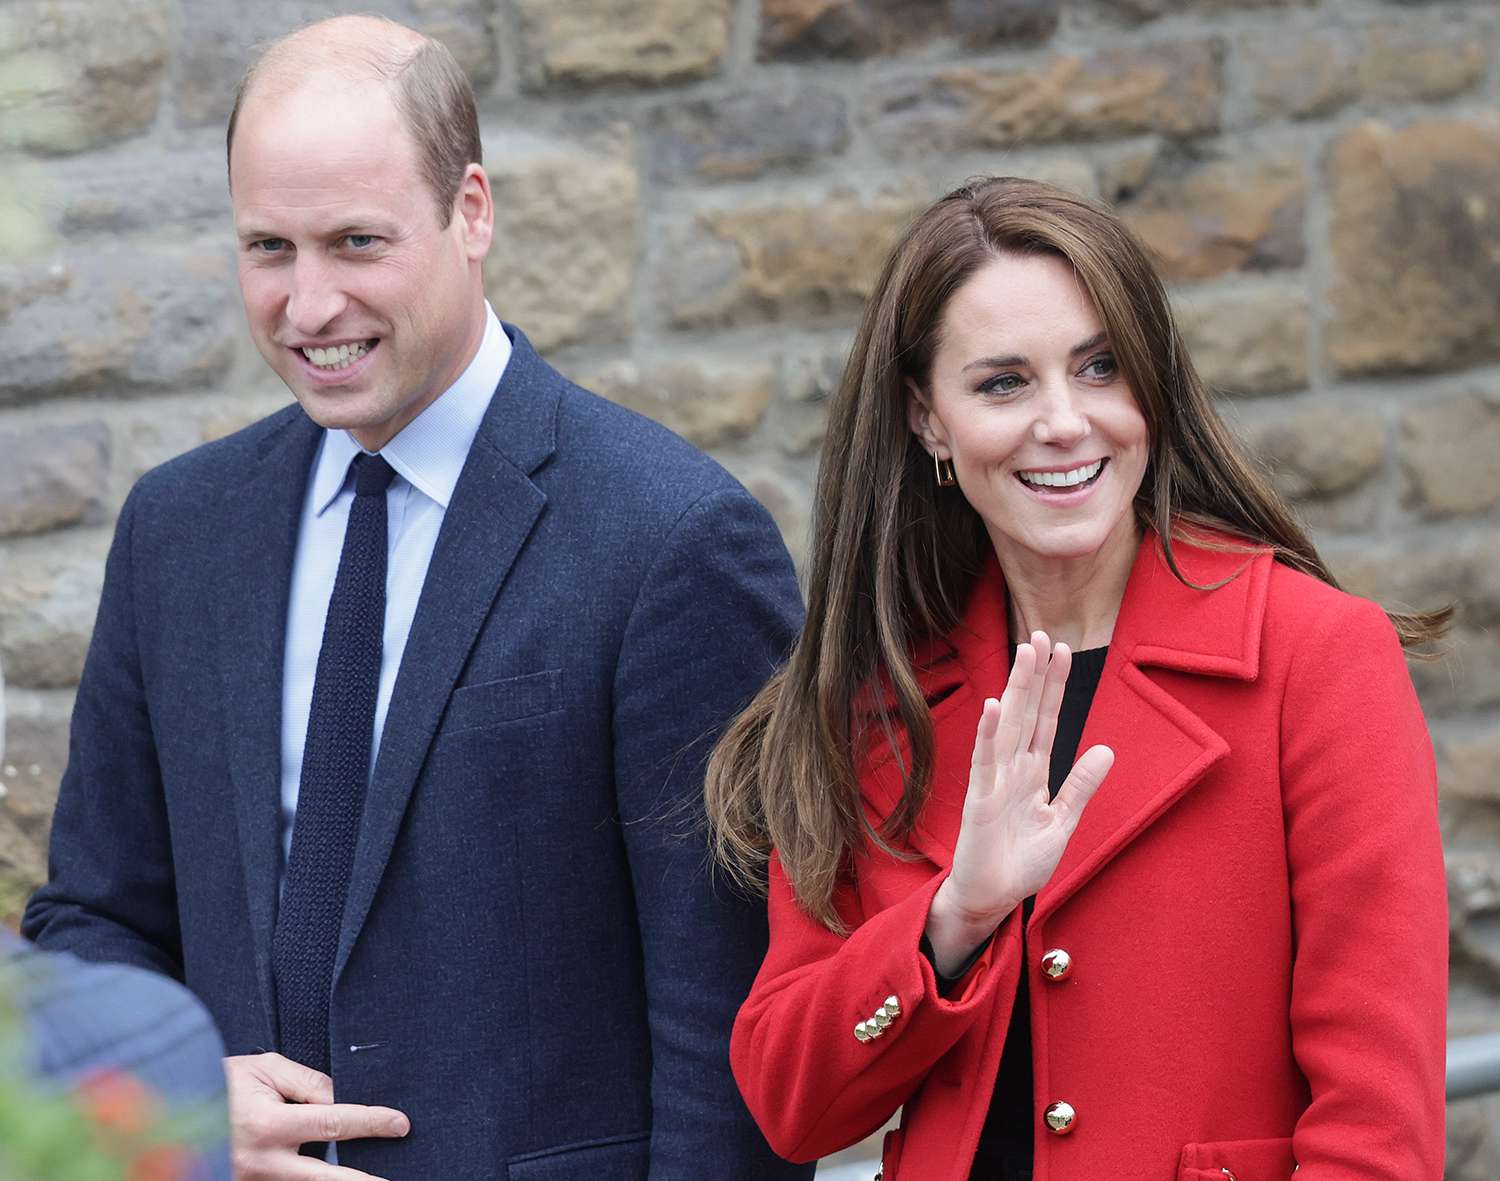 Prince William, Prince of Wales and Catherine, Princess of Wales leave St Thomas Church, which has been has been redeveloped to provide support to vulnerable people, during their visit to Wales on September 27, 2022 in Swansea, Wales.